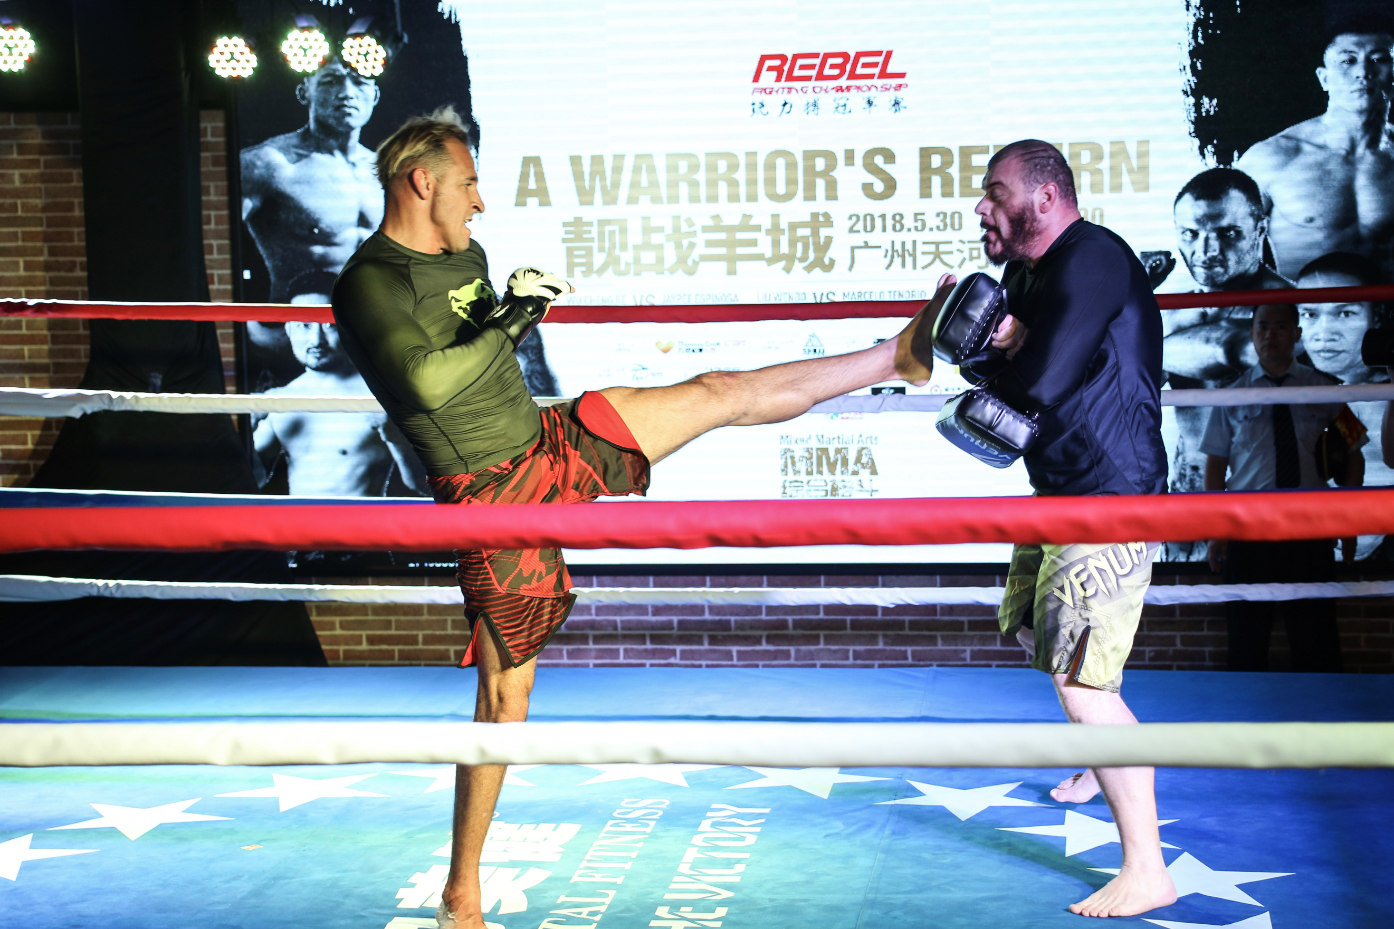 Rebel-FC-Fighters-Impress-MMA-Fans-During-Open-Training-Day-5.jpg